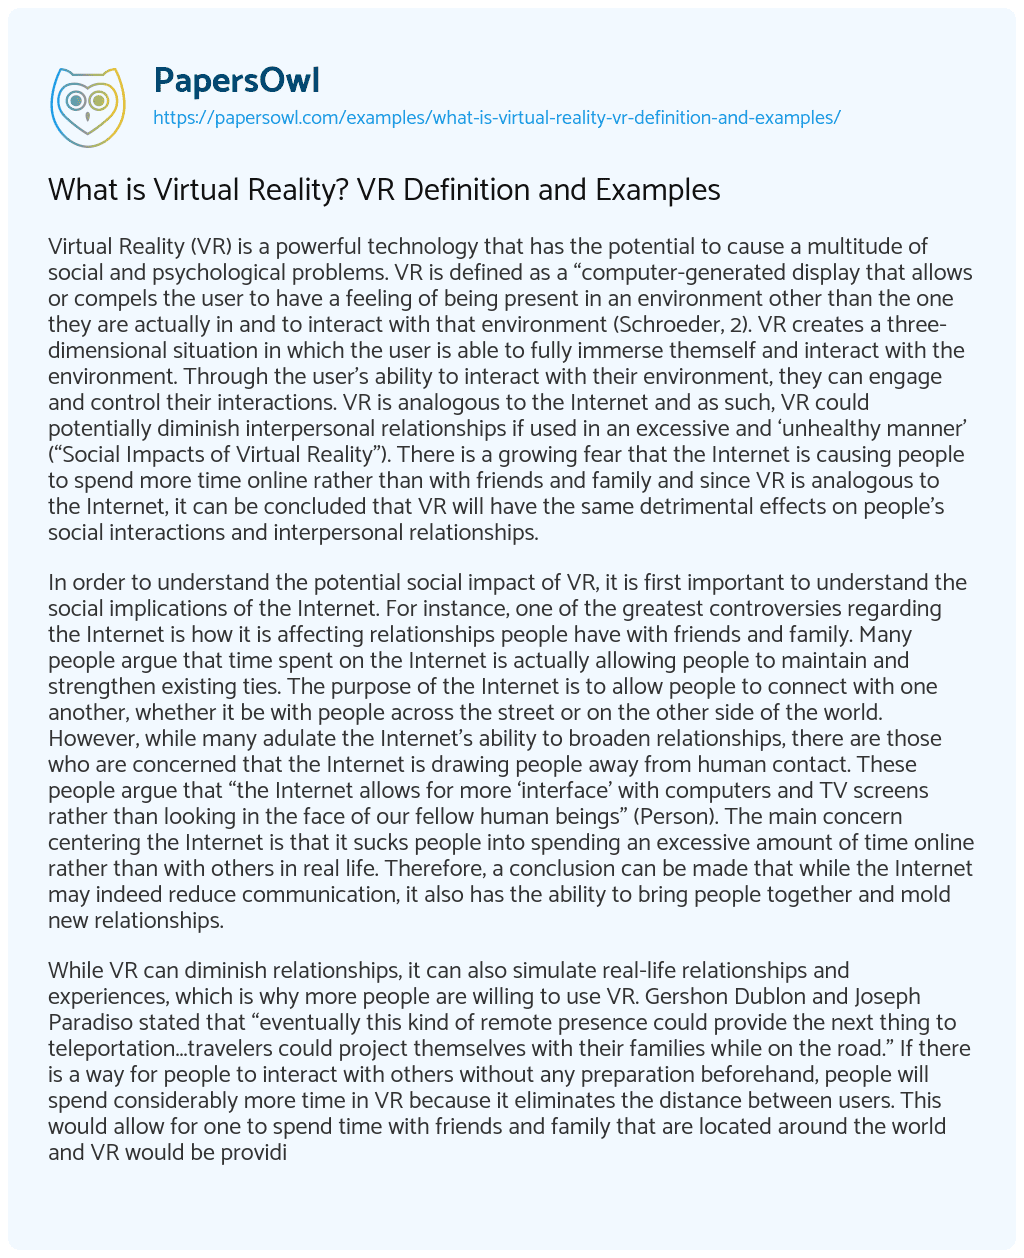 Essay on What is Virtual Reality? VR Definition and Examples